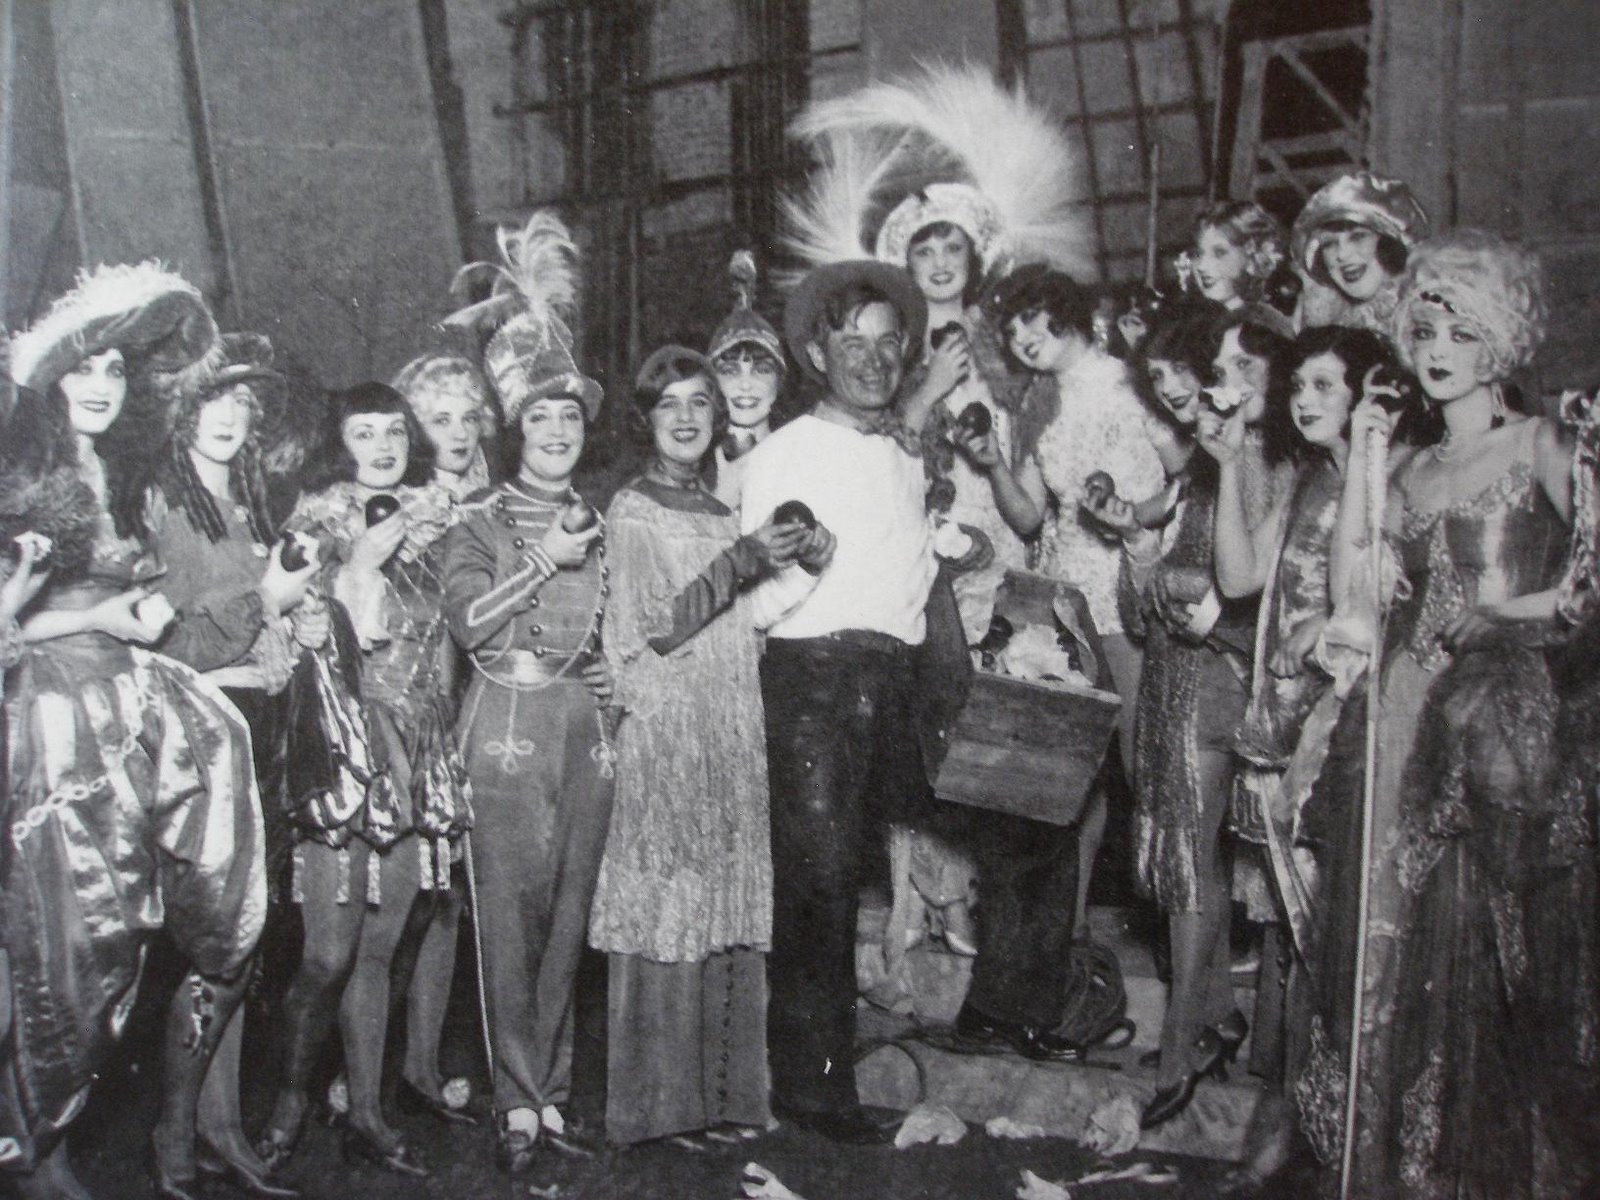 Will Rogers and the Follies Girls